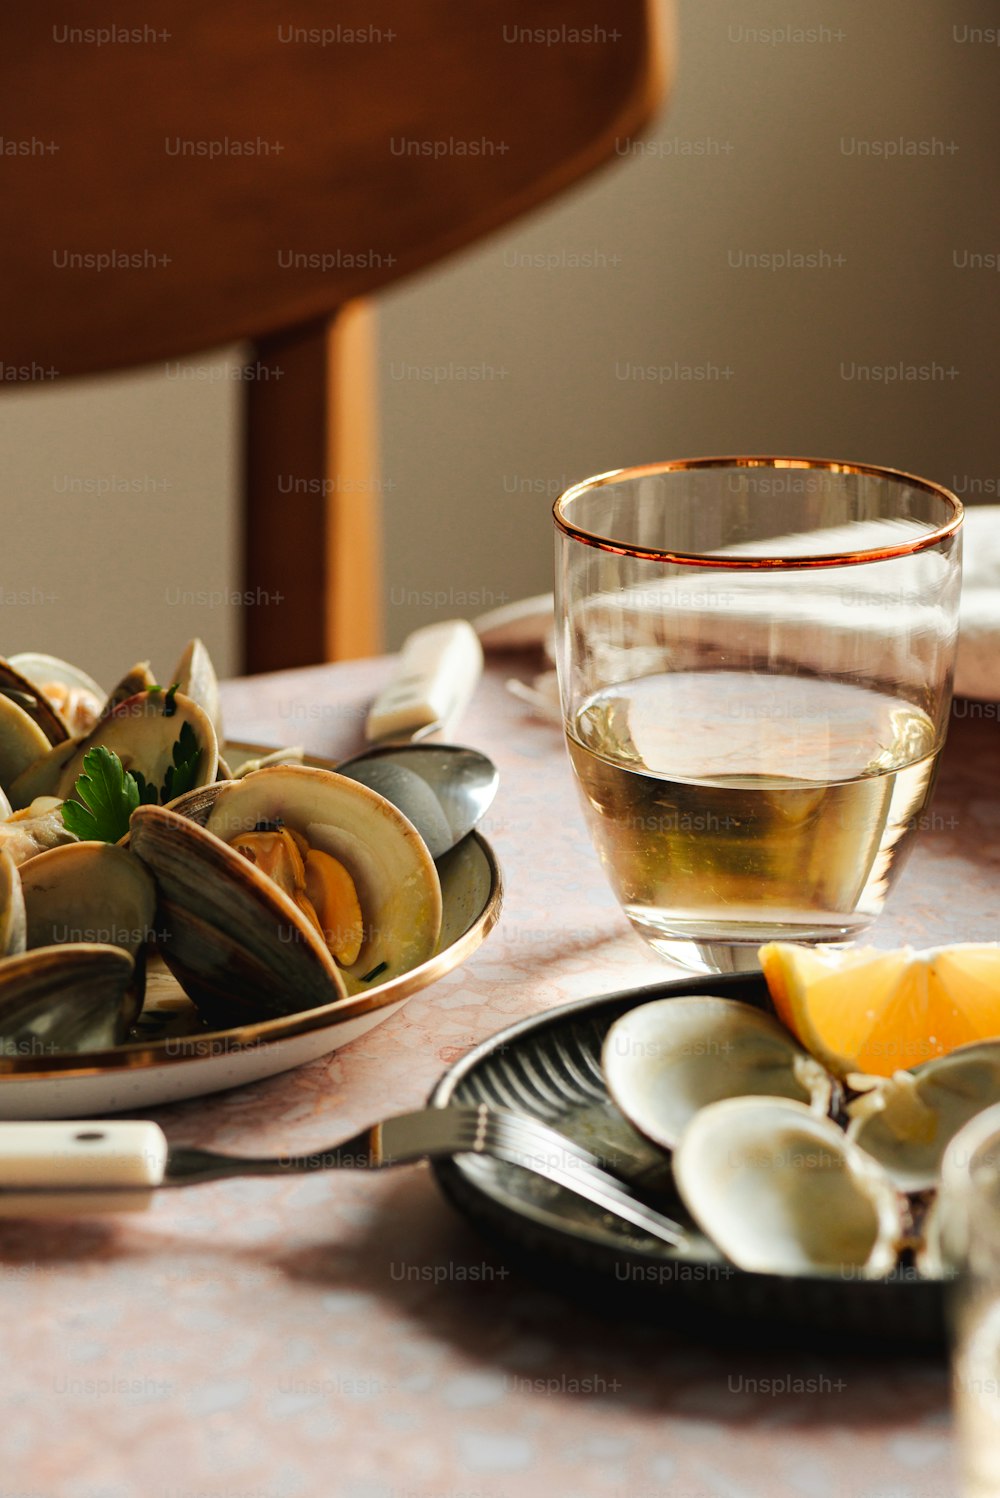 a plate of mussels and a glass of wine on a table